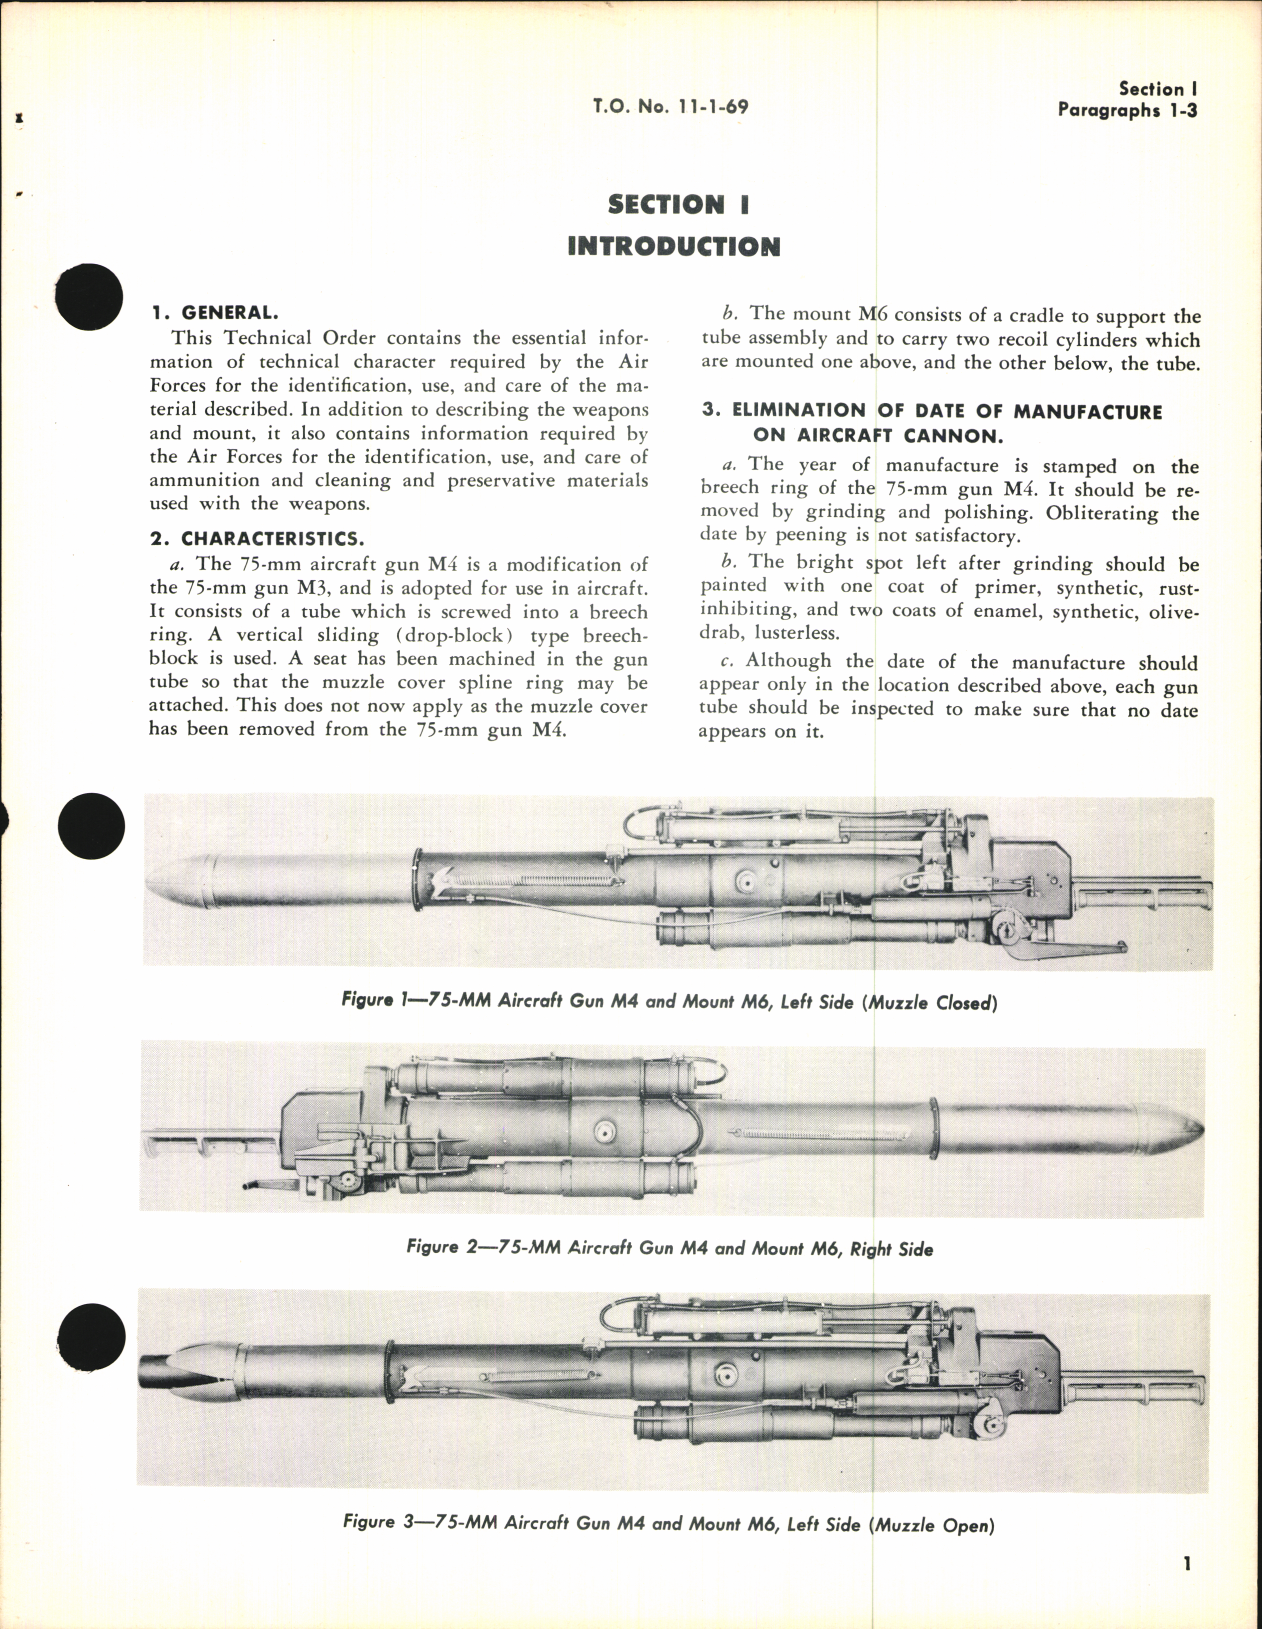 Sample page 5 from AirCorps Library document: Handbook of Instructions with Parts Catalog for 75-MM Aircraft Gun M-4 and Gun Mount M6